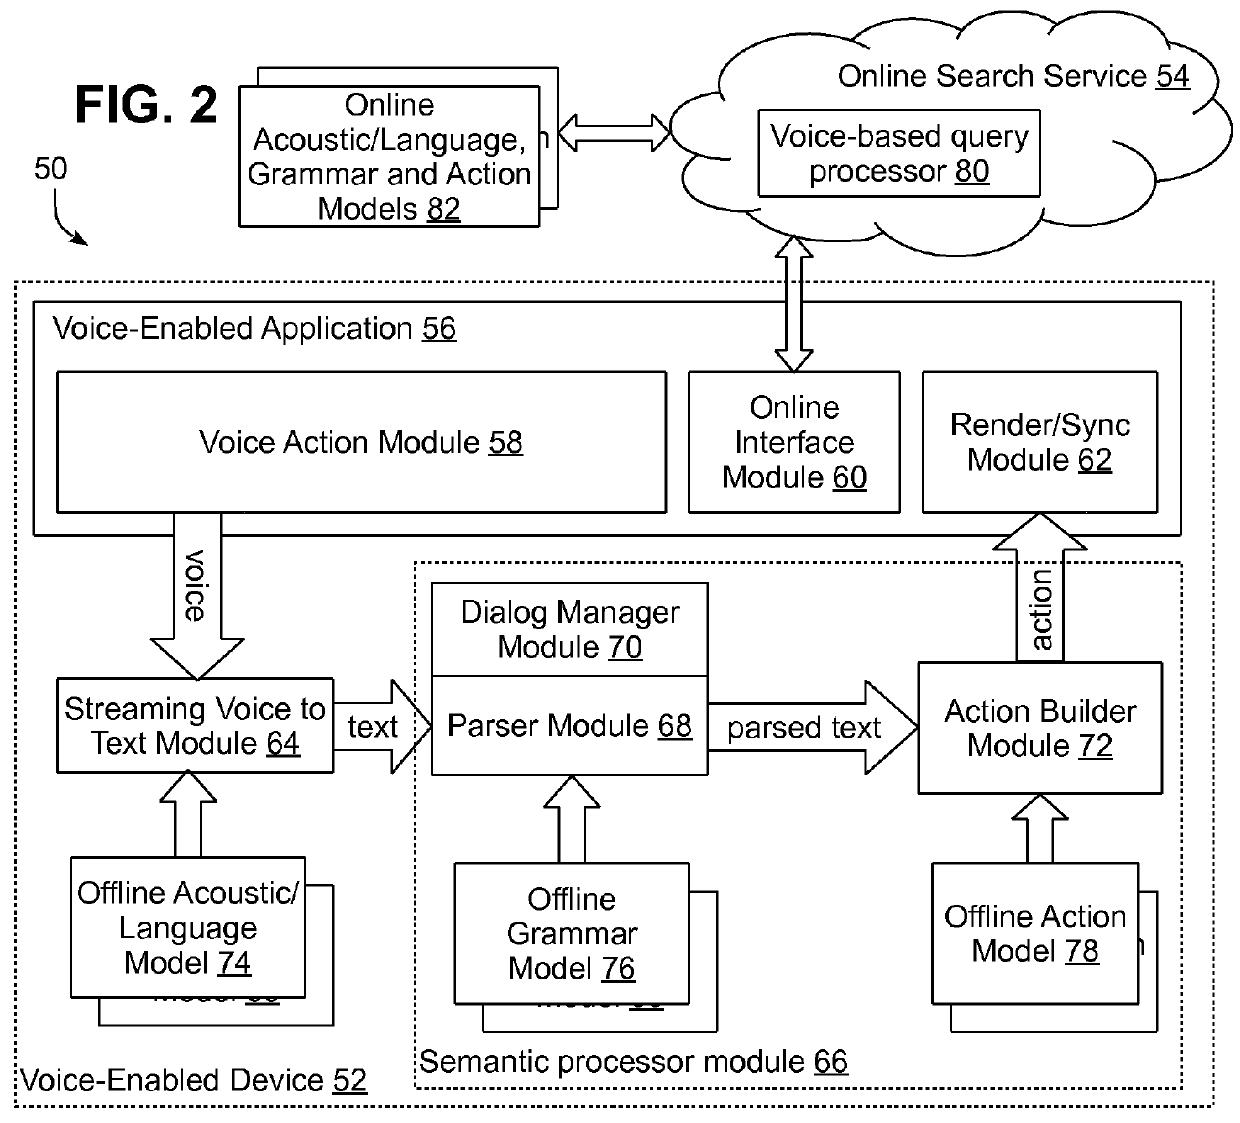 Context-sensitive dynamic update of voice to text model in a voice-enabled electronic device